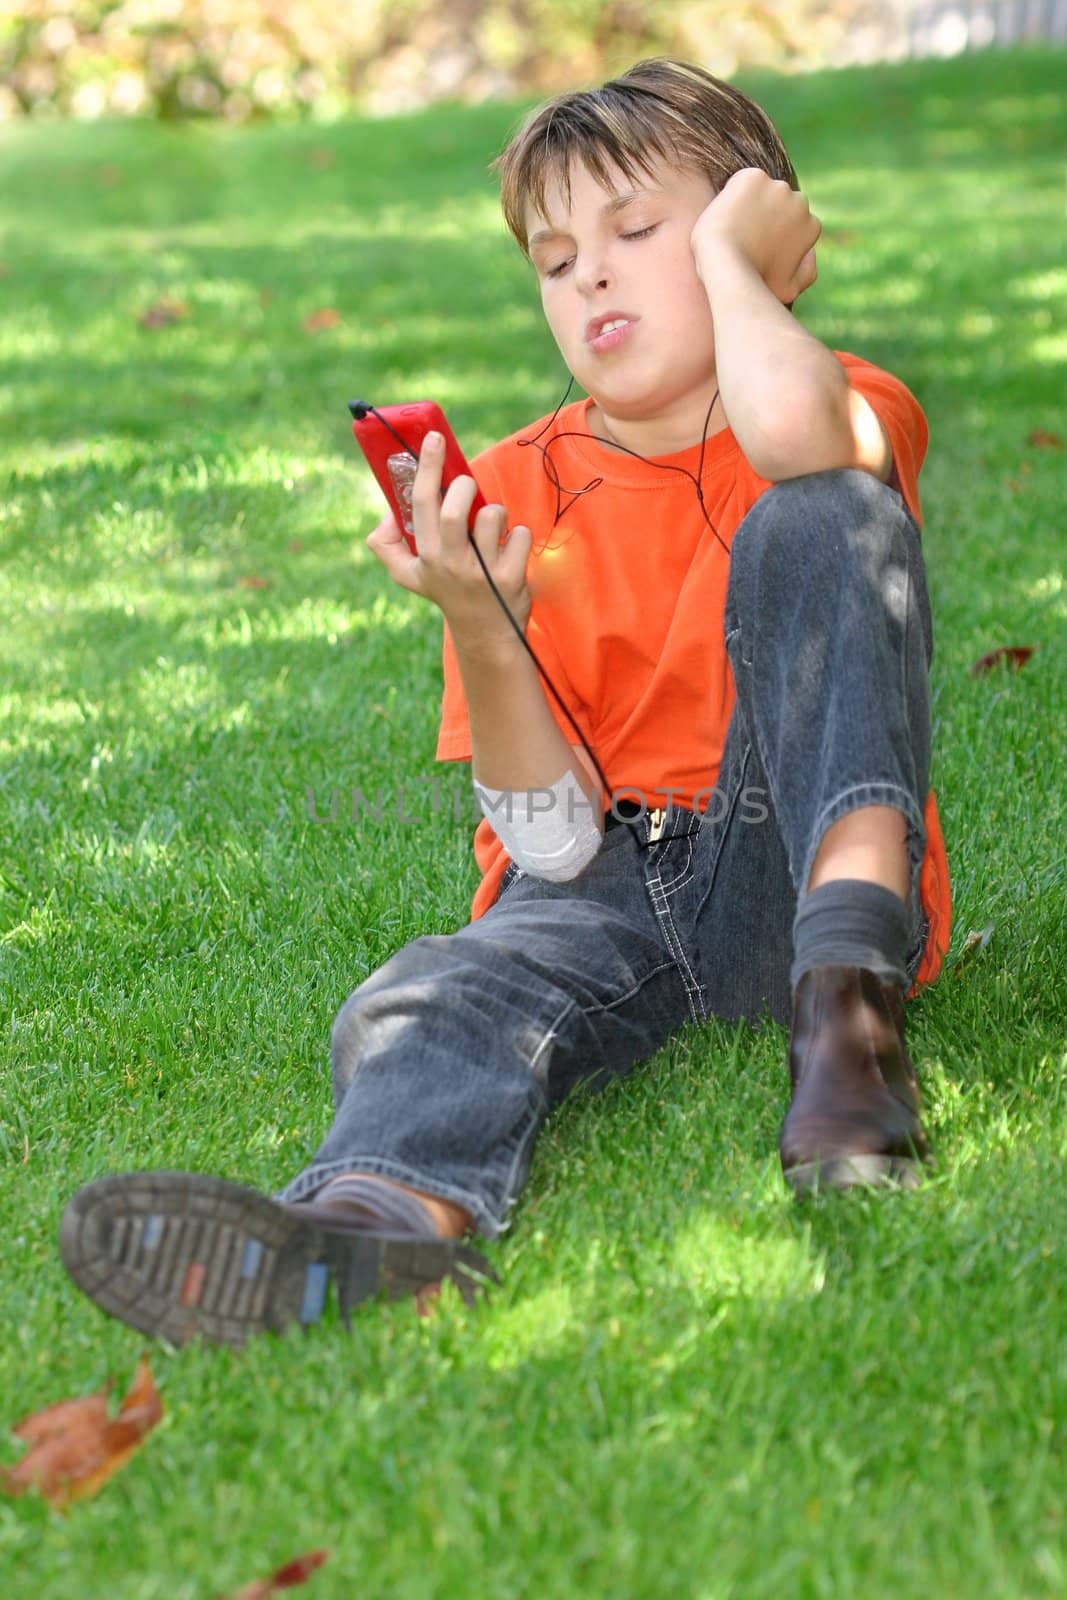 Young child relaxing in the park under the shade of a tree, head titled and looking at the mp3 player in his hand.